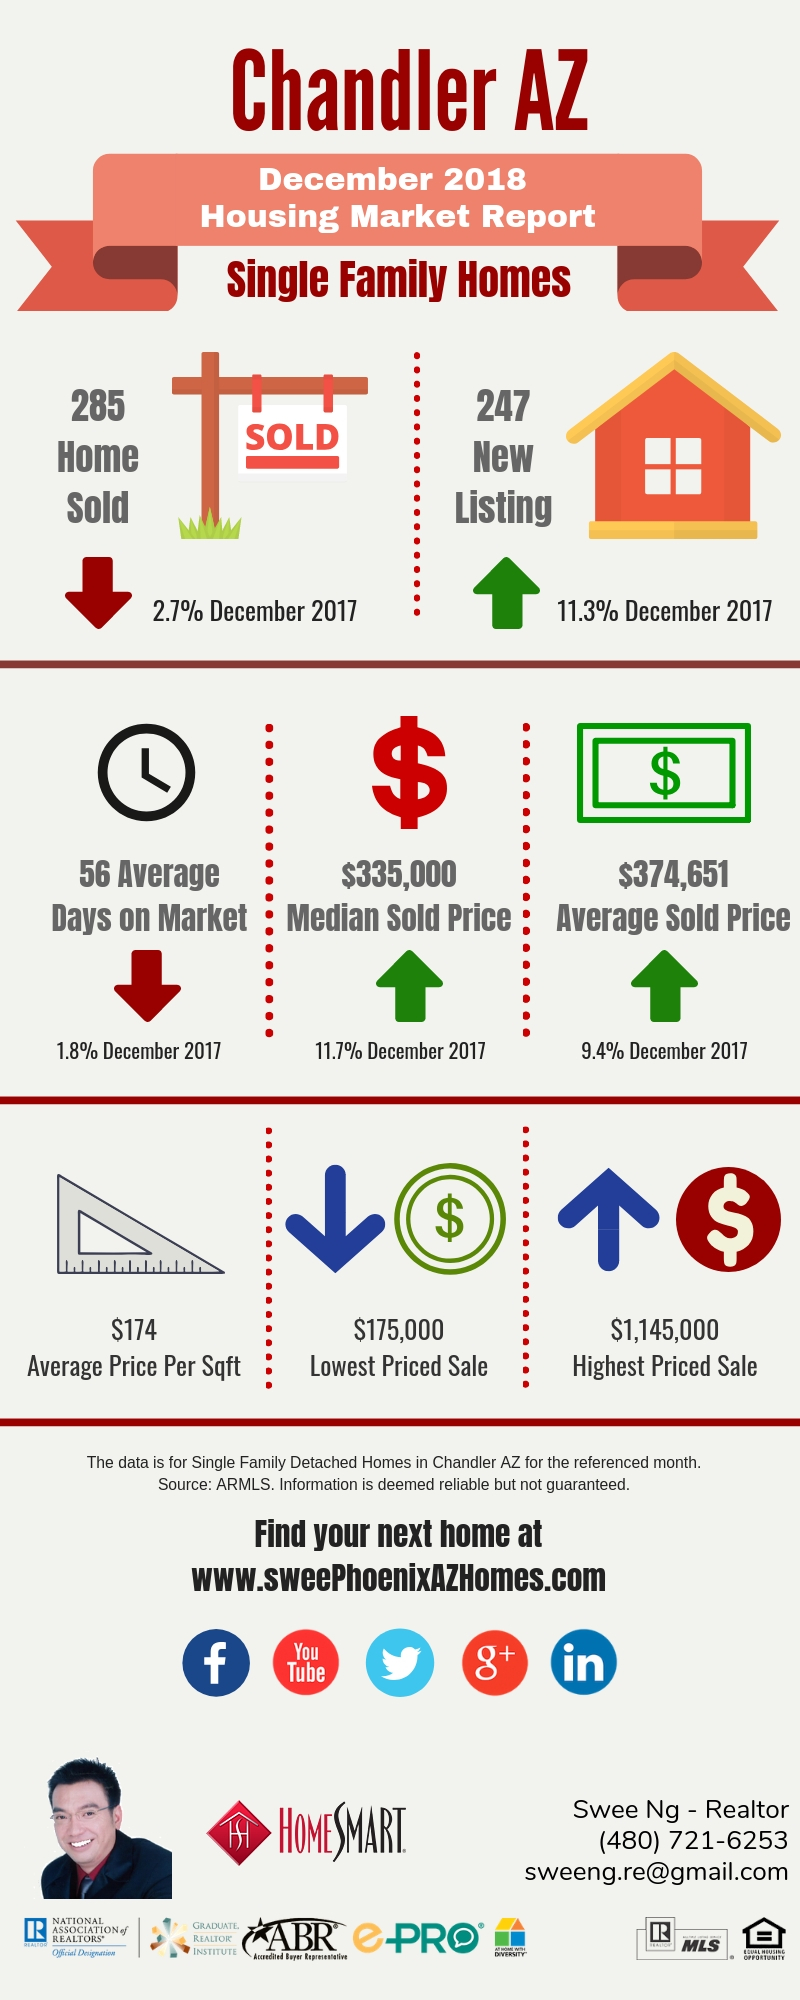 Chandler AZ Housing Market Update December 2018 by Swee Ng, House Value and Real Estate Listings